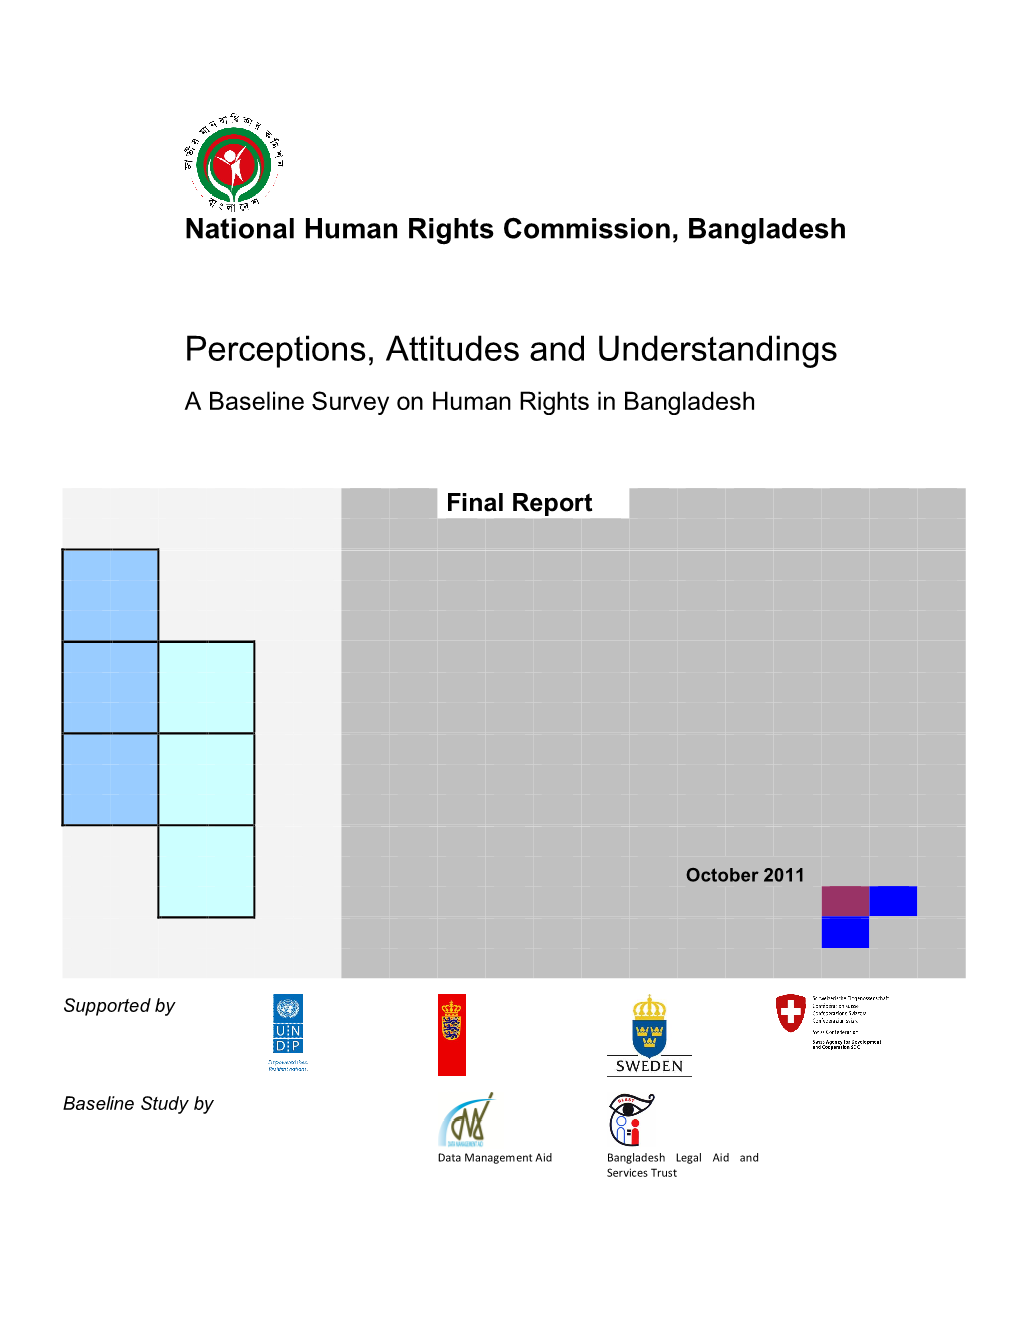 Perceptions, Attitudes and Understandings a Baseline Survey on Human Rights in Bangladesh